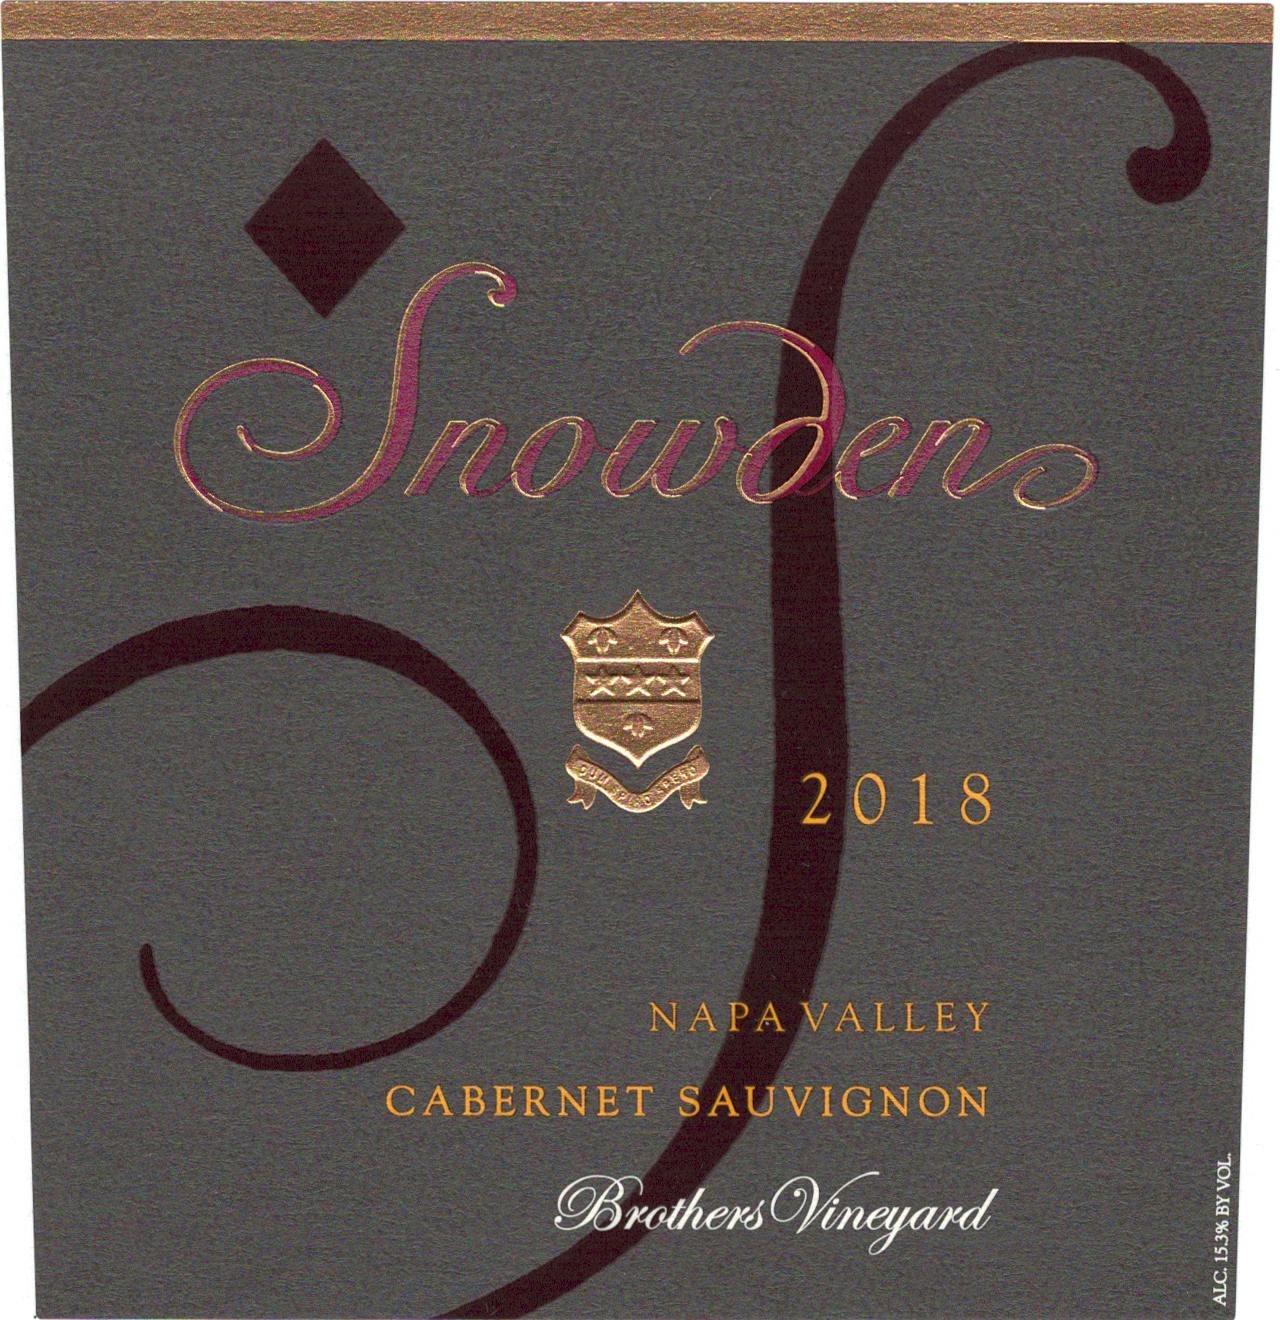 Label for Snowden